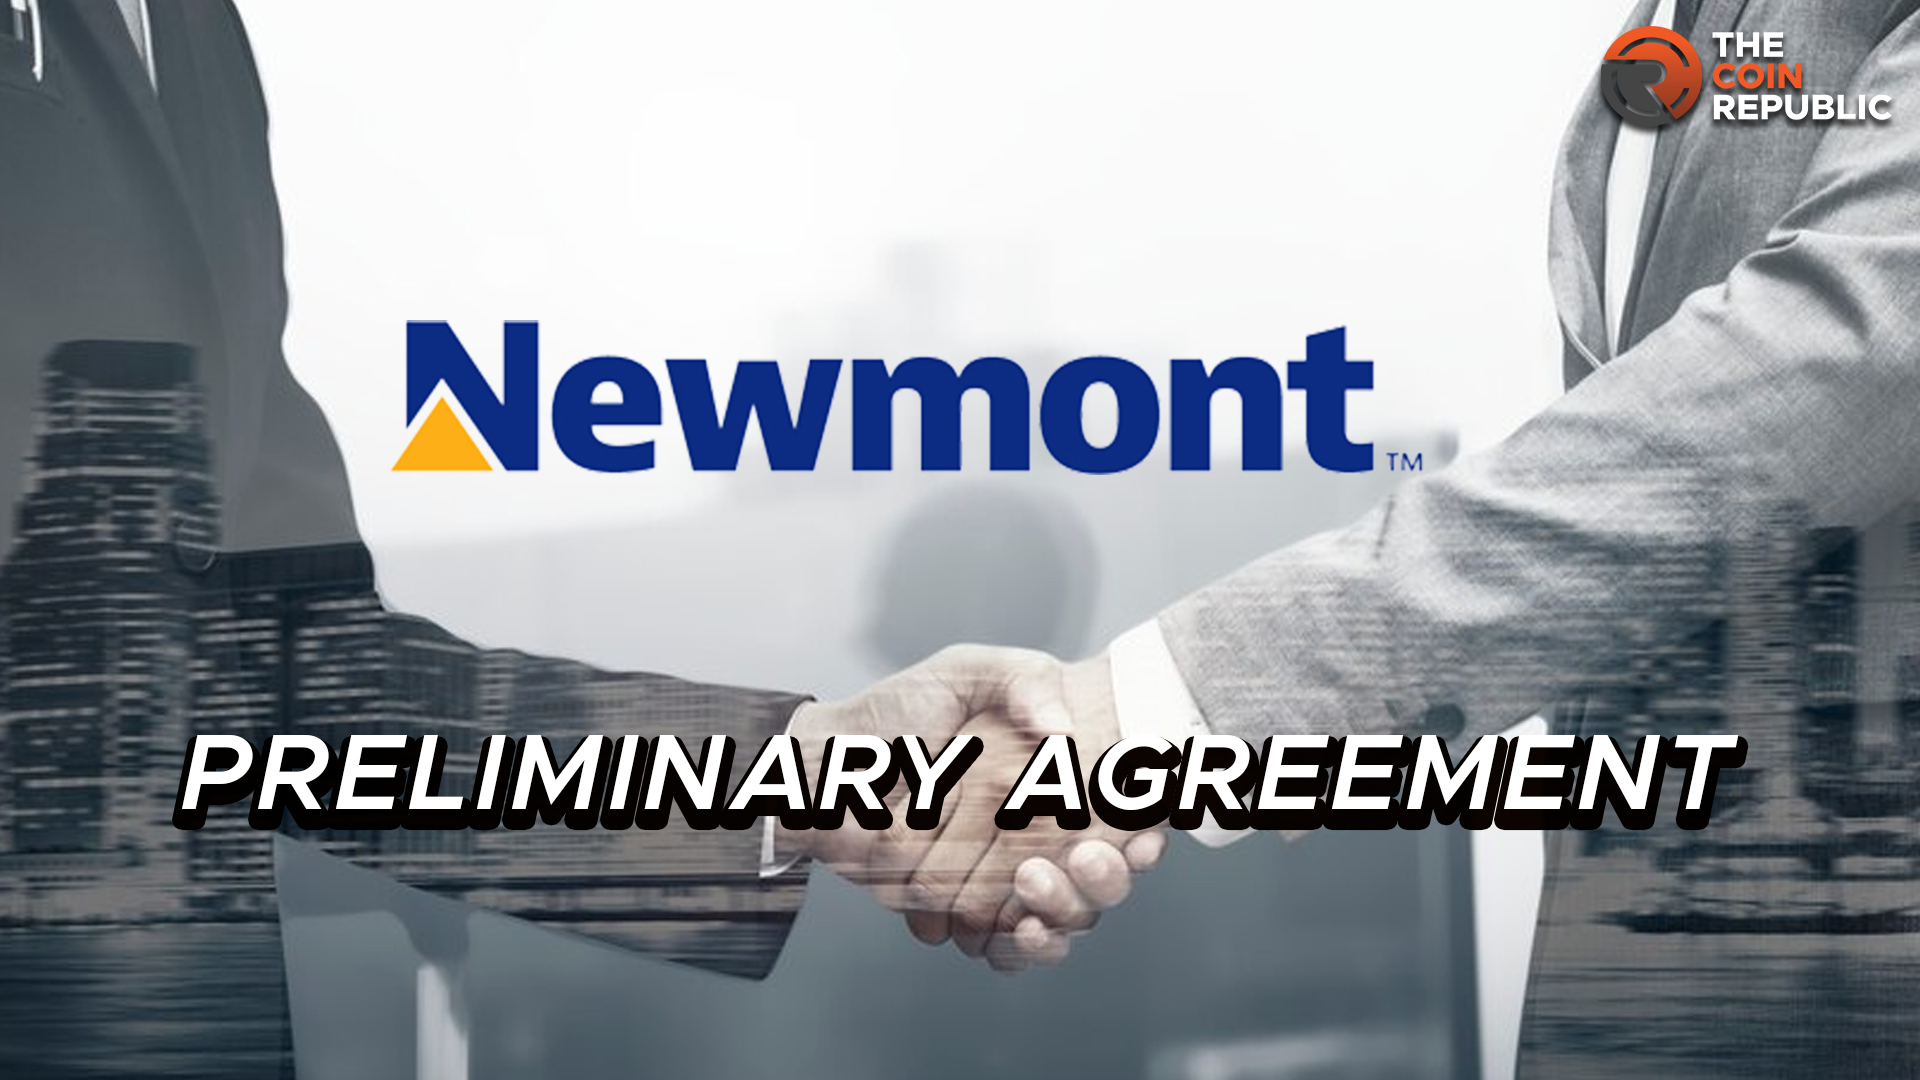 How Will Preliminary Agreement Impact Newmont Share Price?